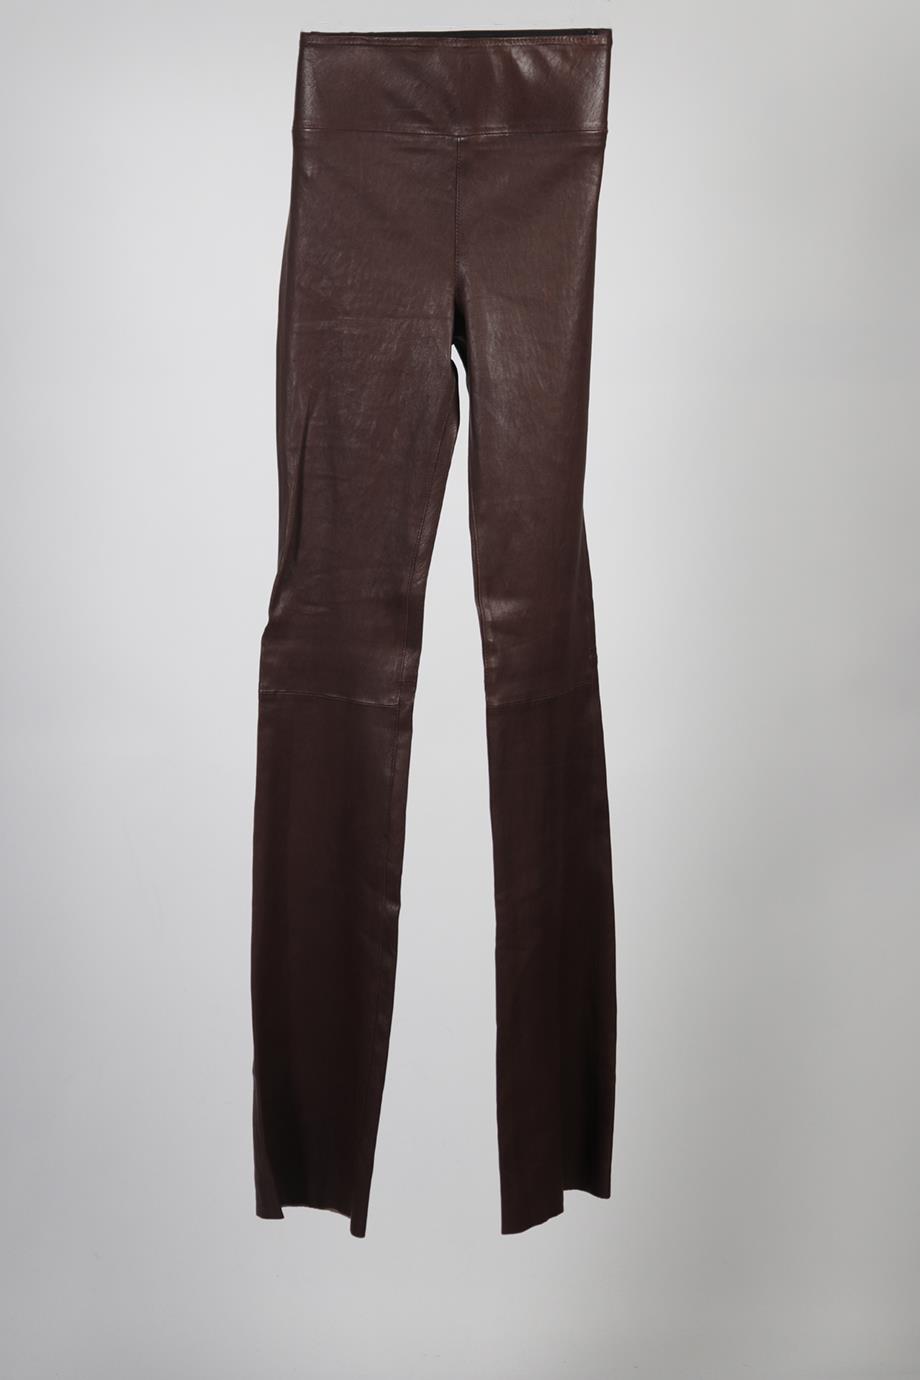 SPRWMN LEATHER FLARED PANTS SMALL